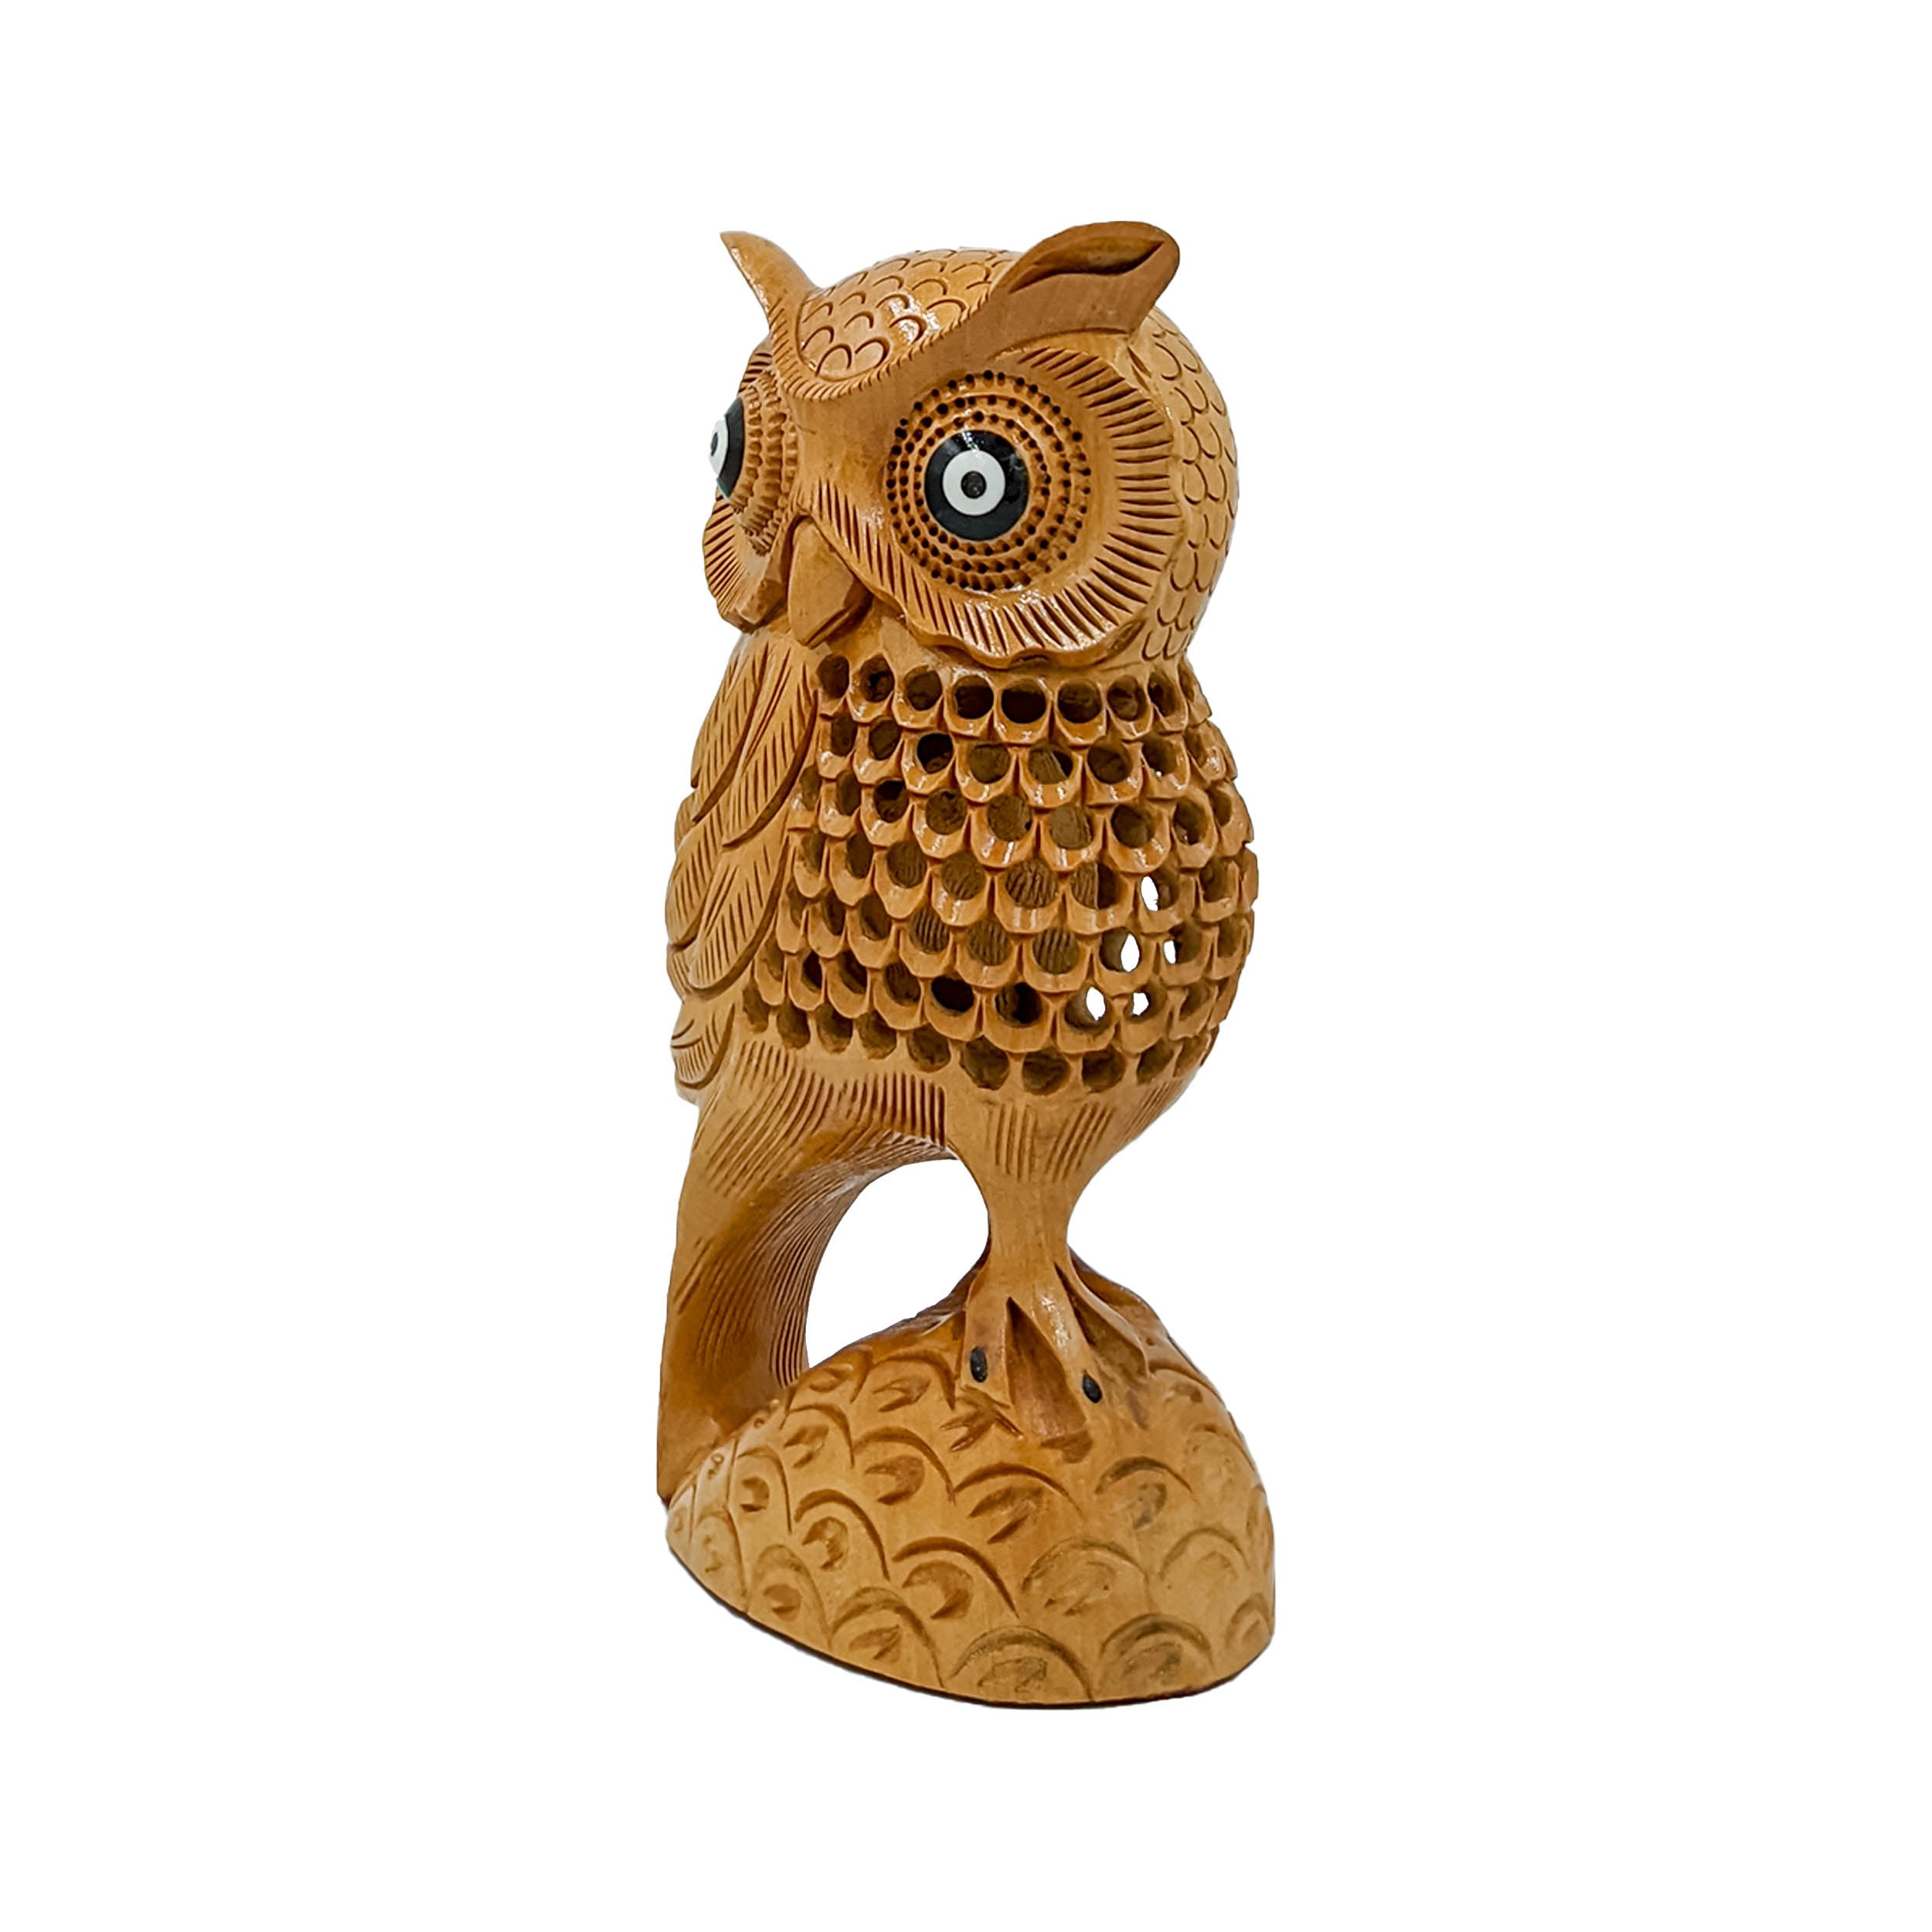 Intricately Carved for Elegant Home Décor Handmade Wooden Owl Statue